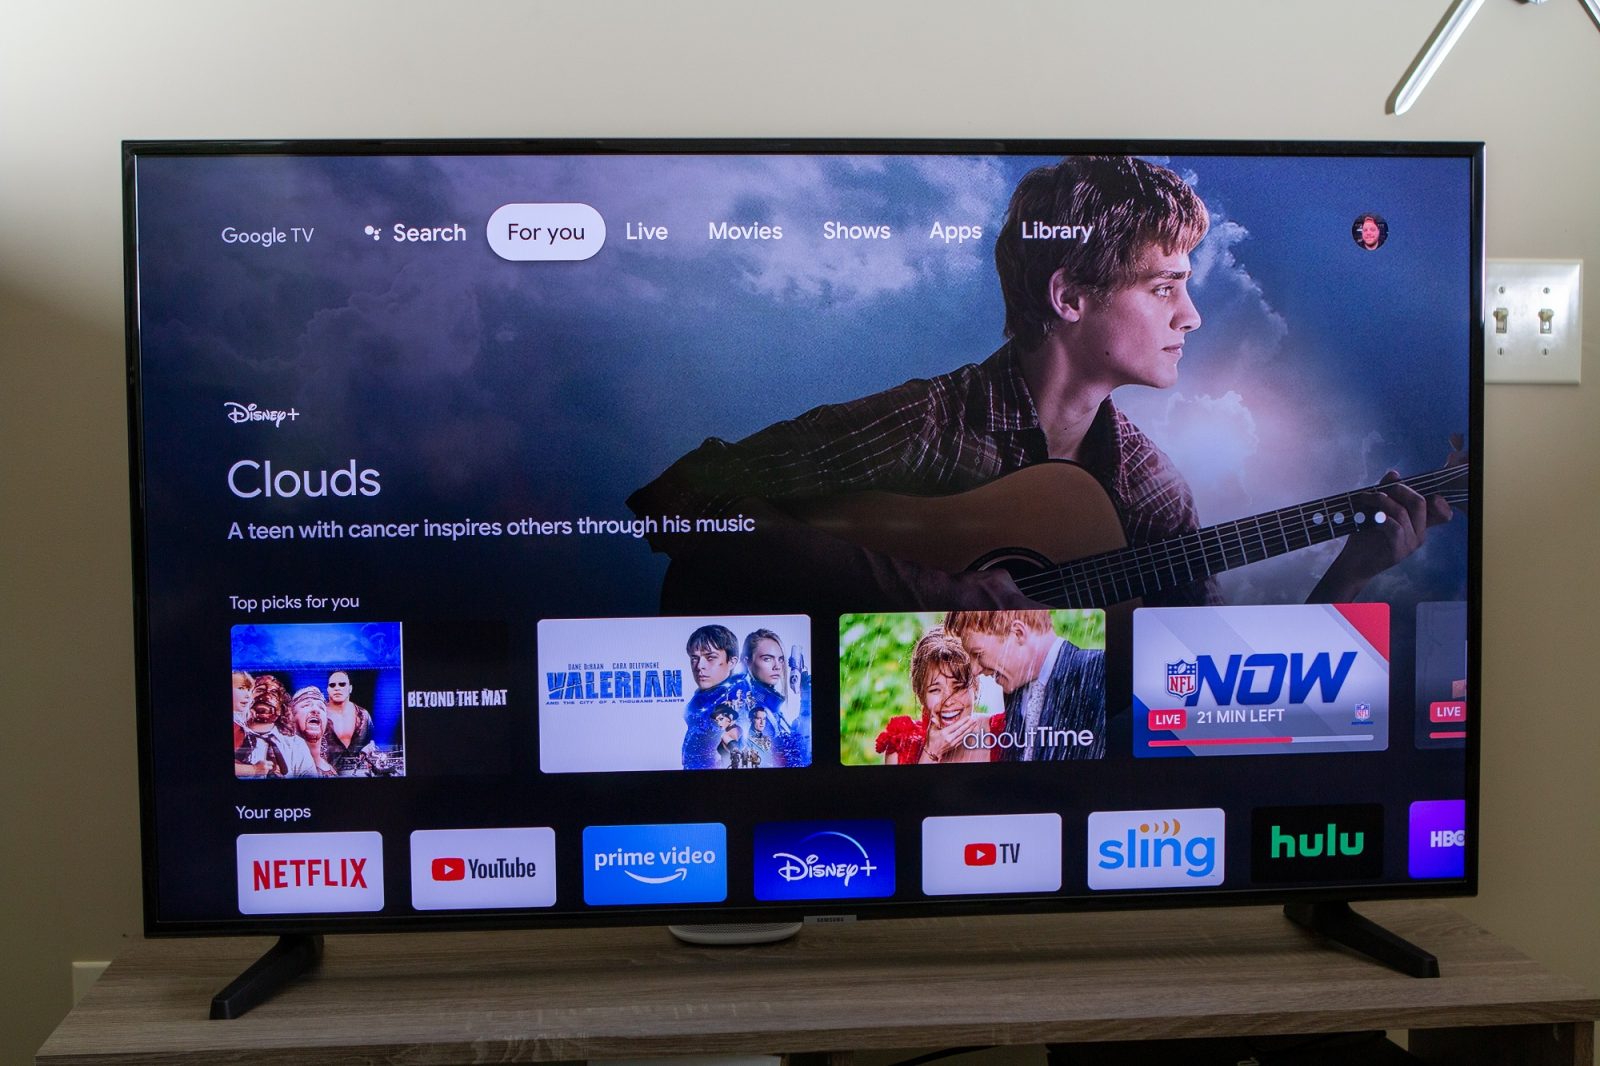 Google TV and Pluto TV partner to bring you 300 free live TV channels